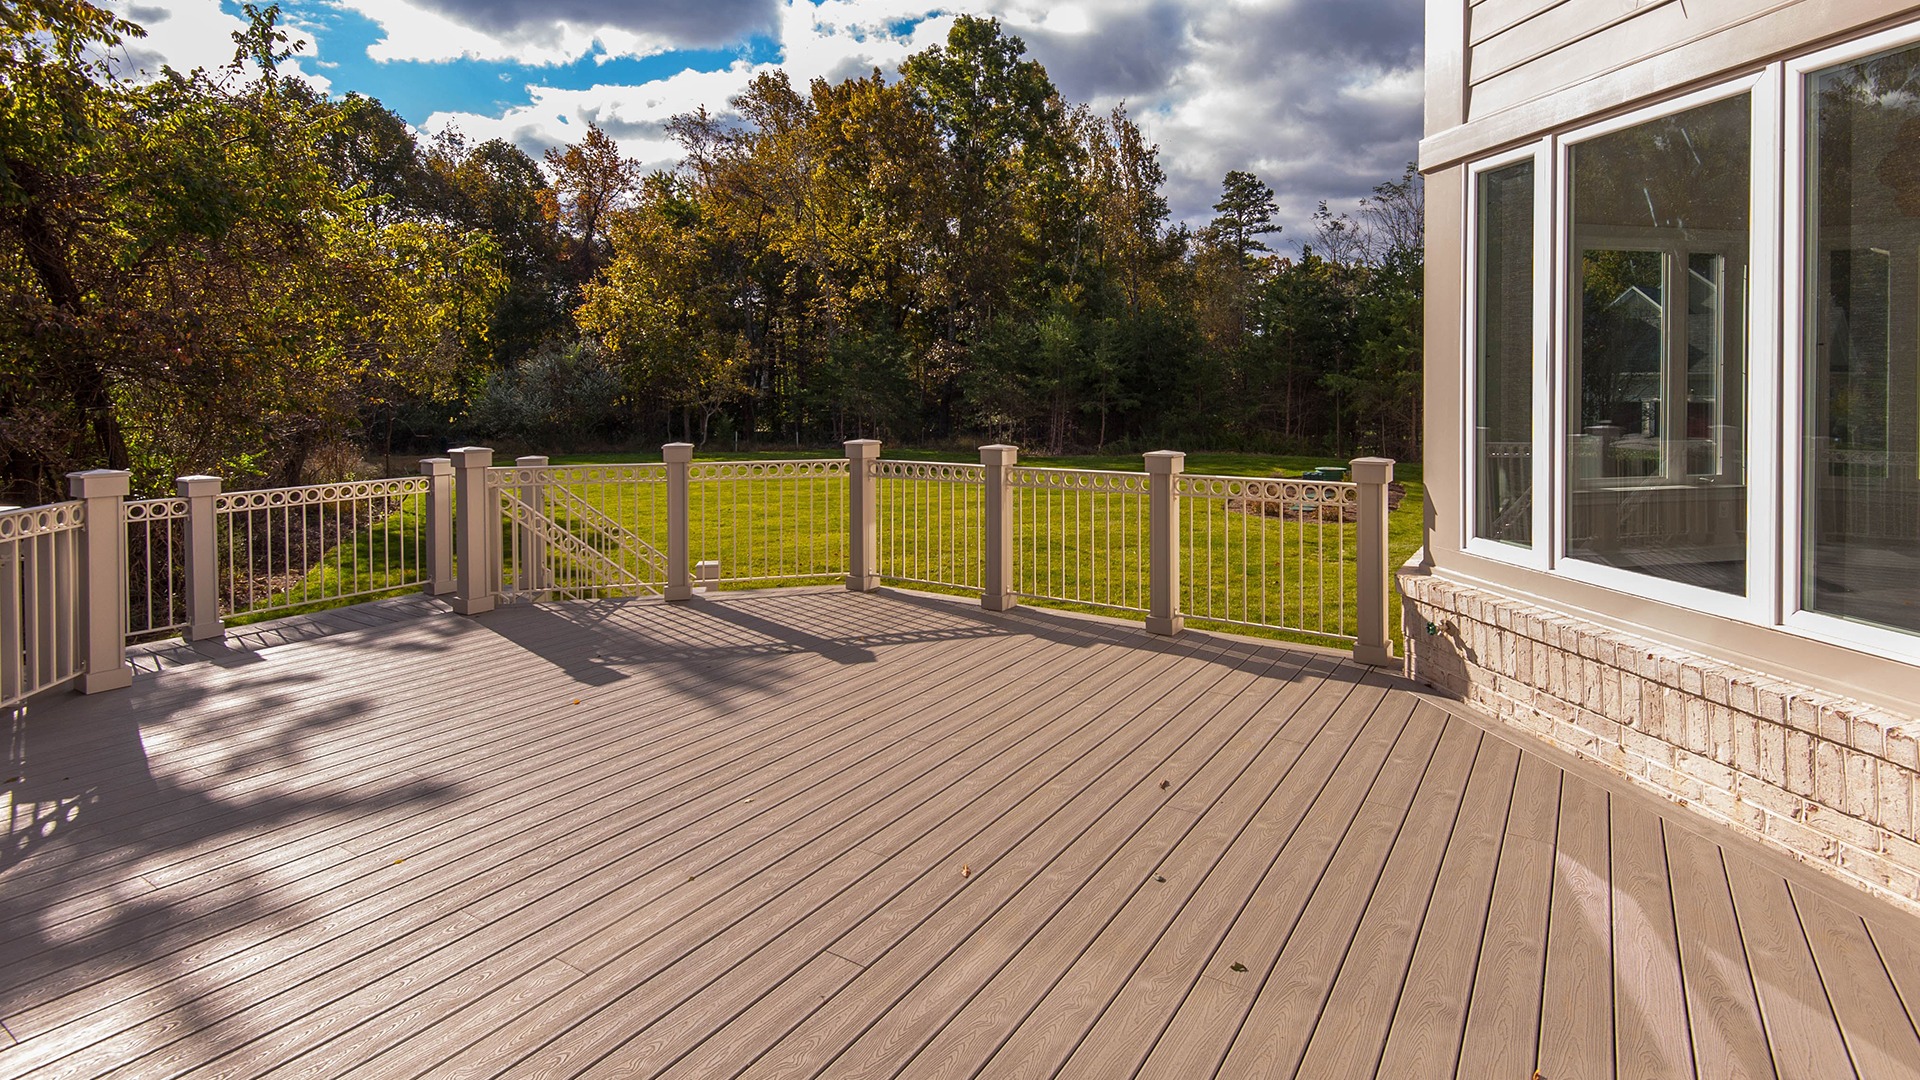 A custom designed composite deck with a beautiful view of the rear year.